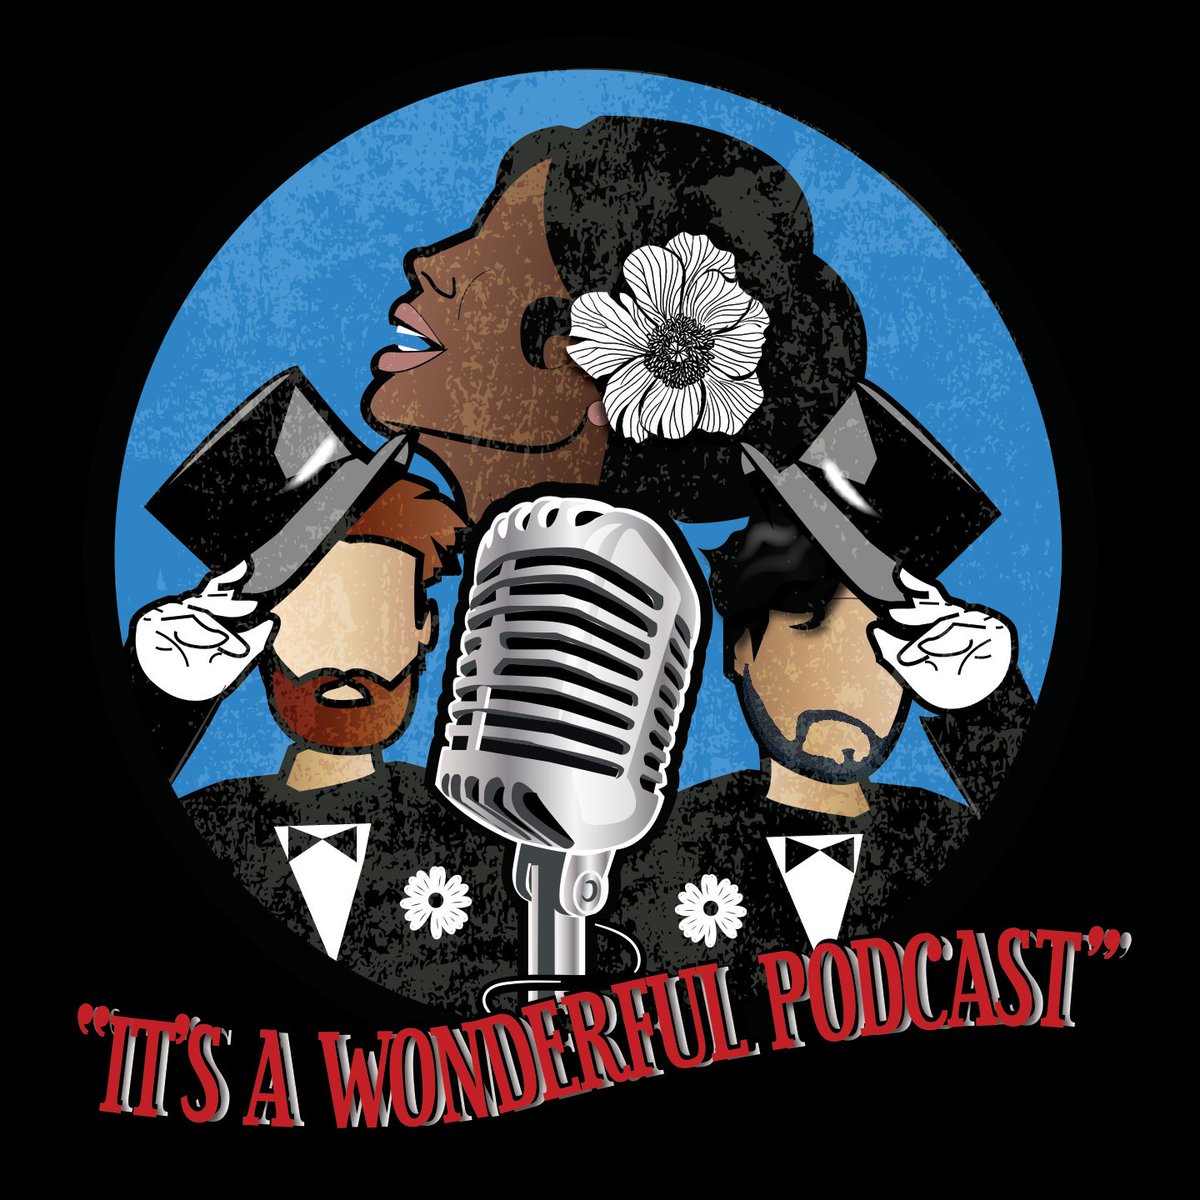 The main show, the namesake, #ItsAWonderful1 is permanently bringing @JeannineDaBean on as a co host!! 

Alternating episodes with the returning @nolandean27 😁

#PodernFamily #Podcast #Podcasts #Podcasting #PodcastGrowth